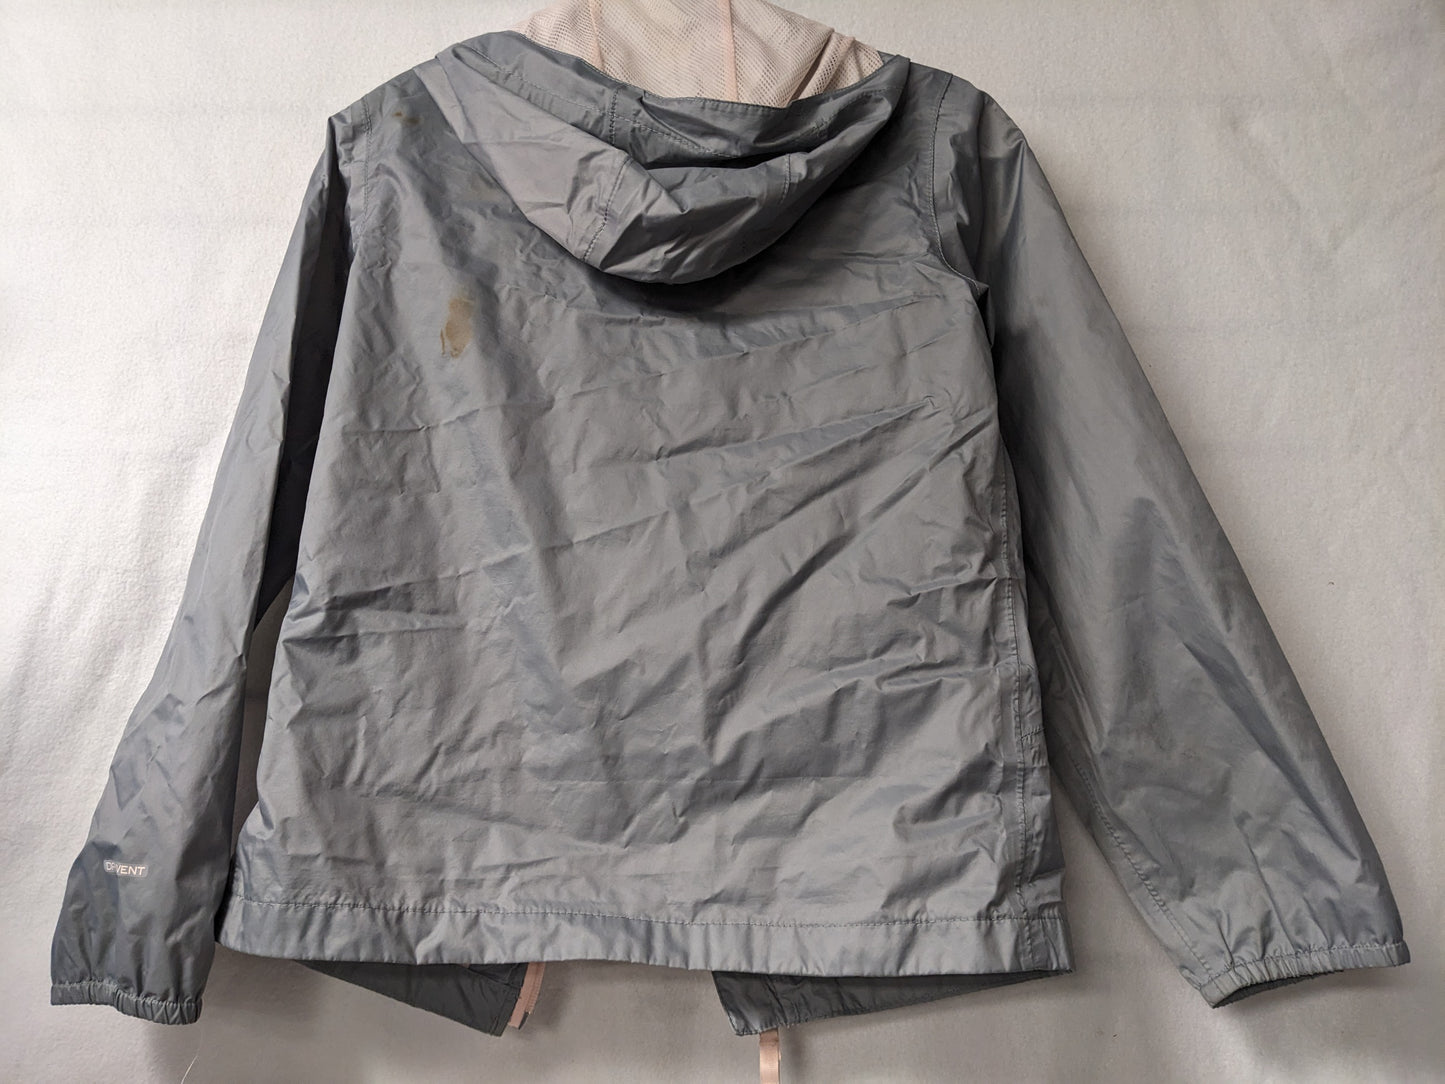 The North Face Hooded Youth Windbreaker/Rain Jacket/Coat Size Youth Medium Color Gray Condition Used